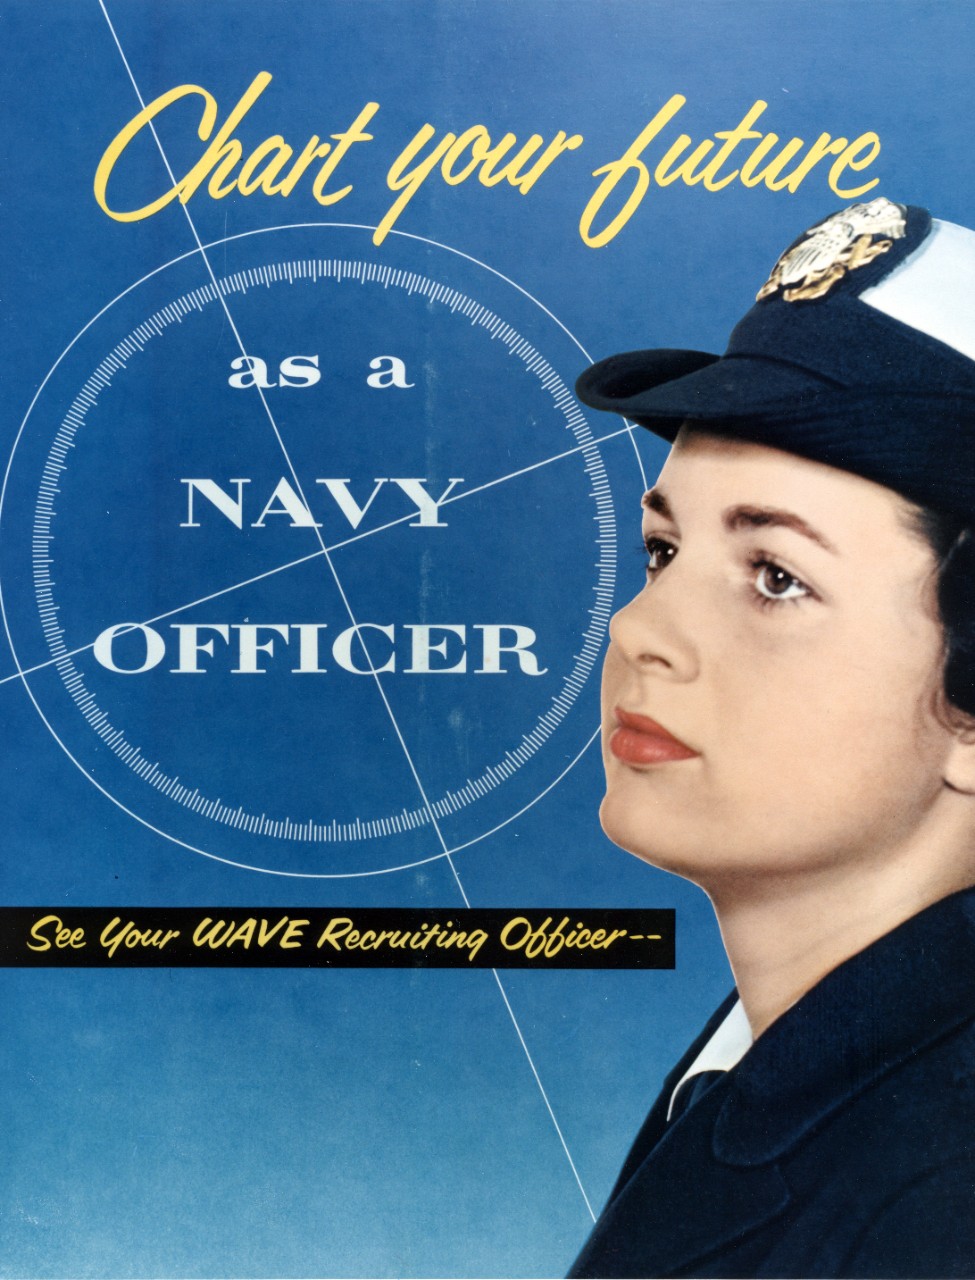 <p>L02-12.04.01 Chart Your Future as a Navy Officer</p>